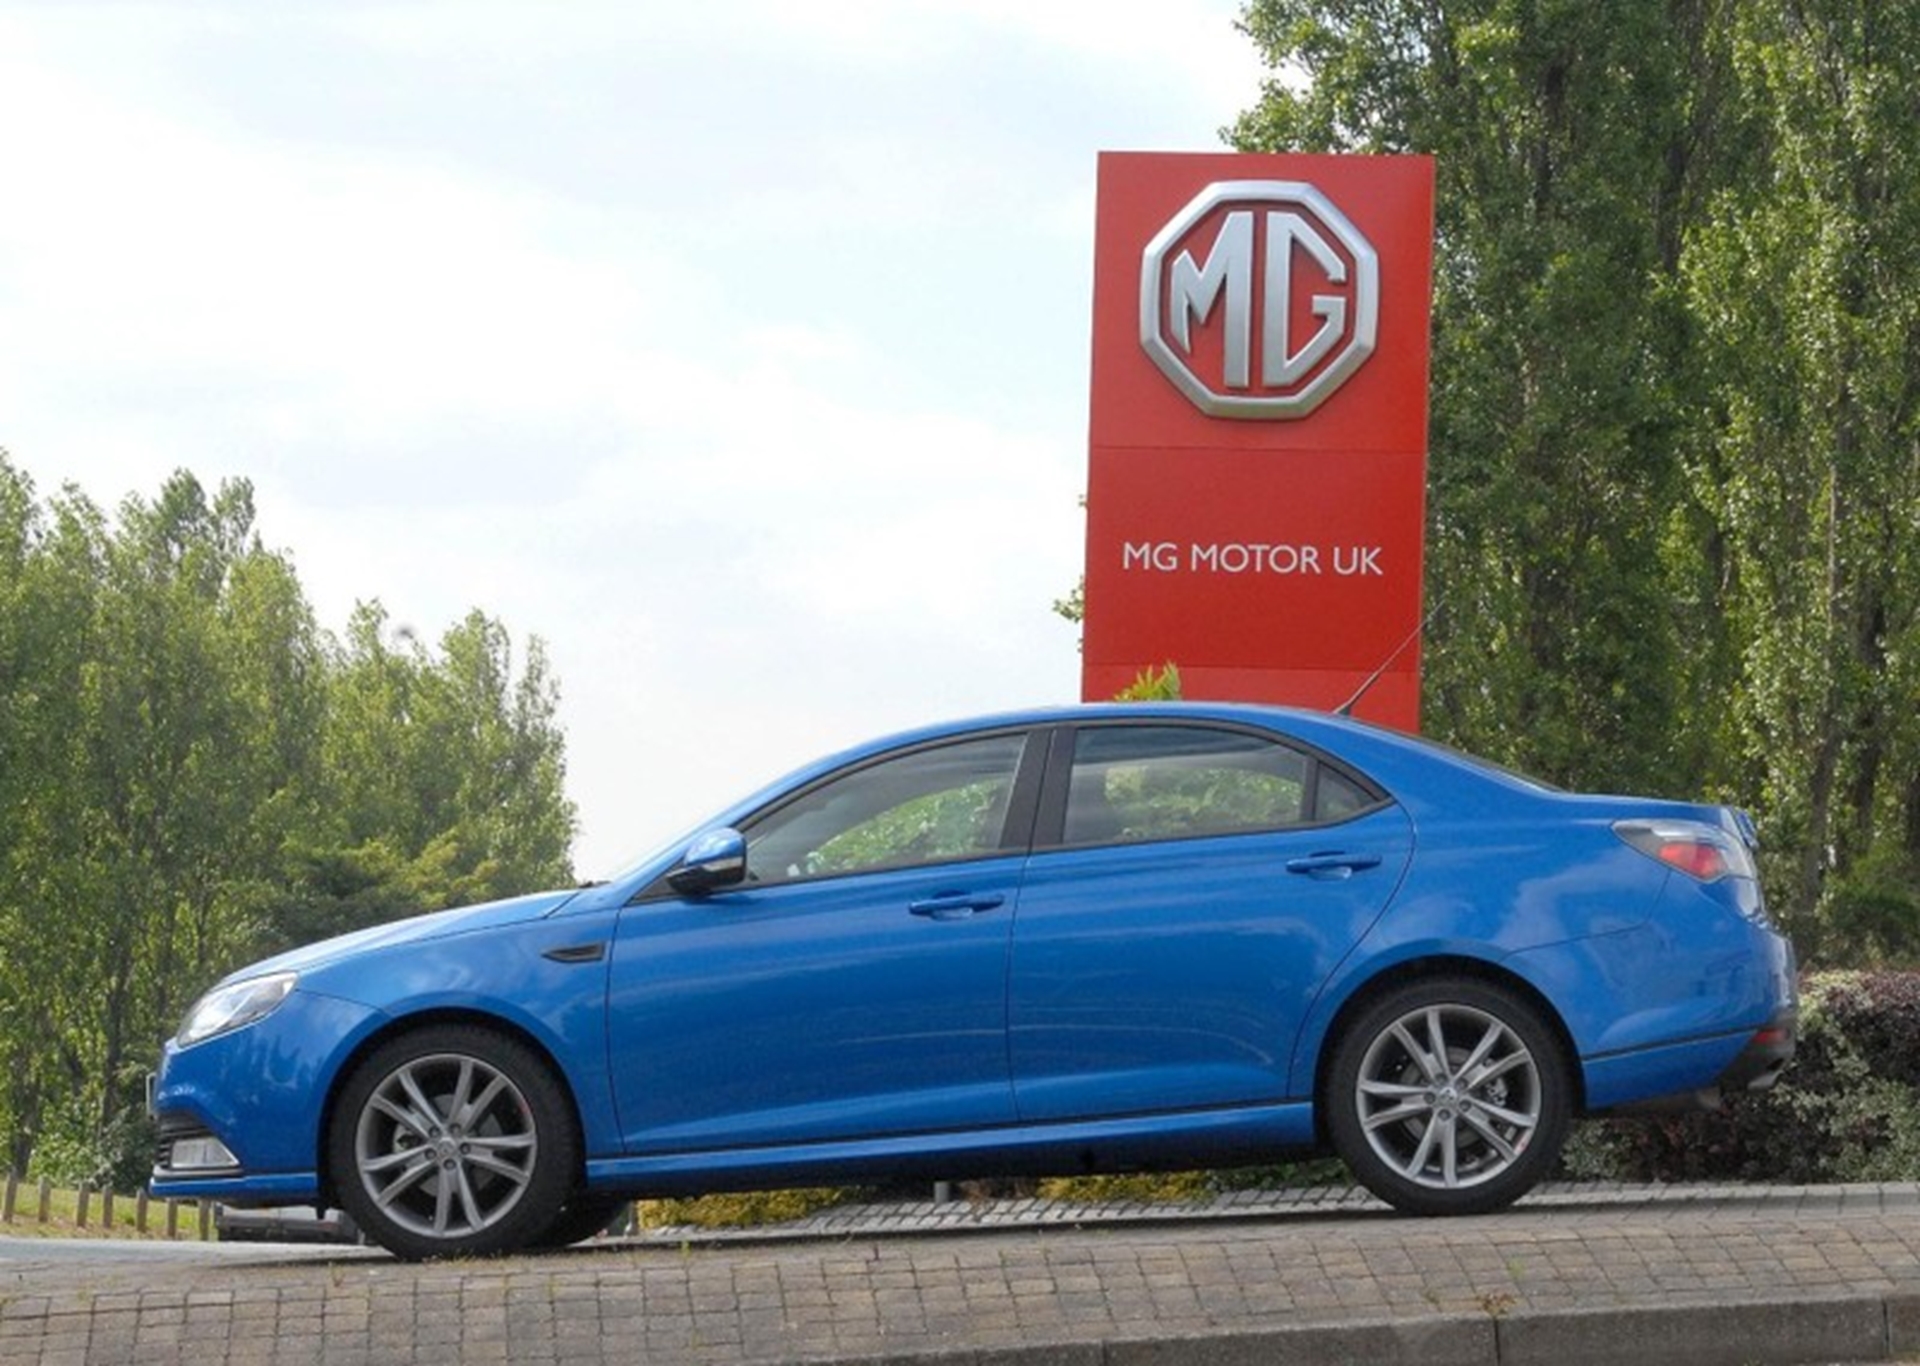 NEW MG DEALERS CHALK UP SALES ON OPENING DAY